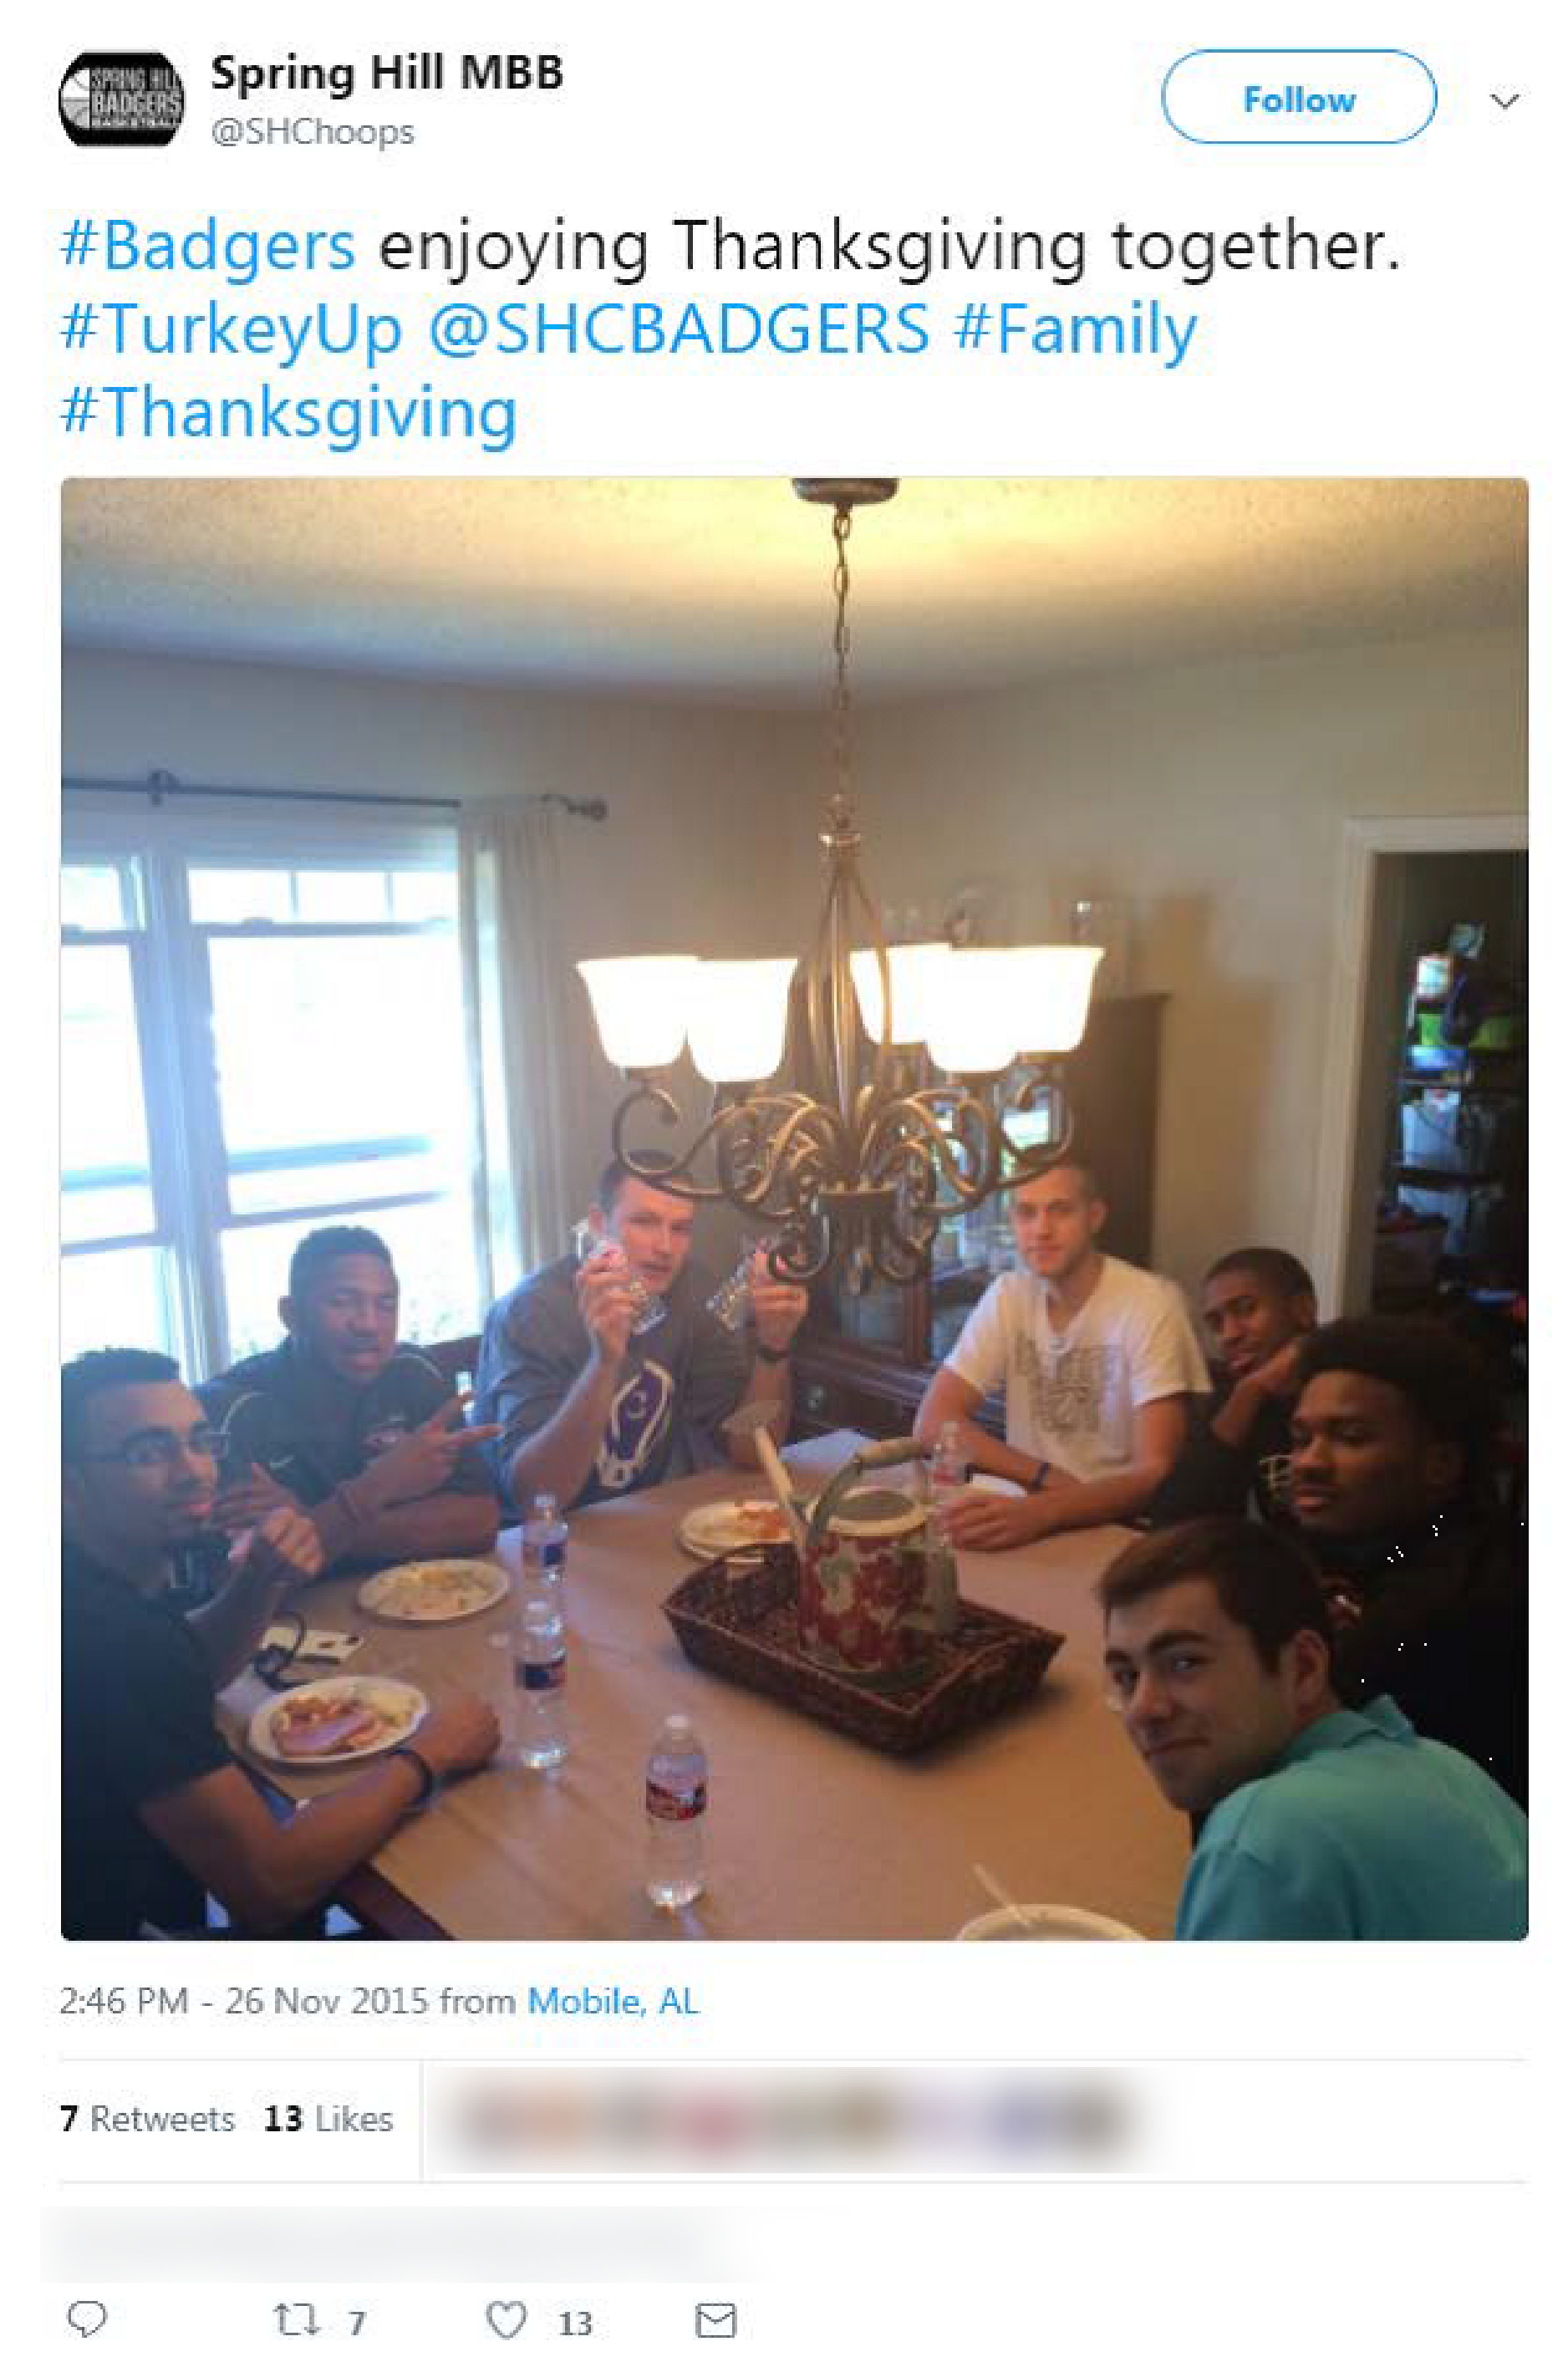 Tweet from the SHC men's basketball team about family